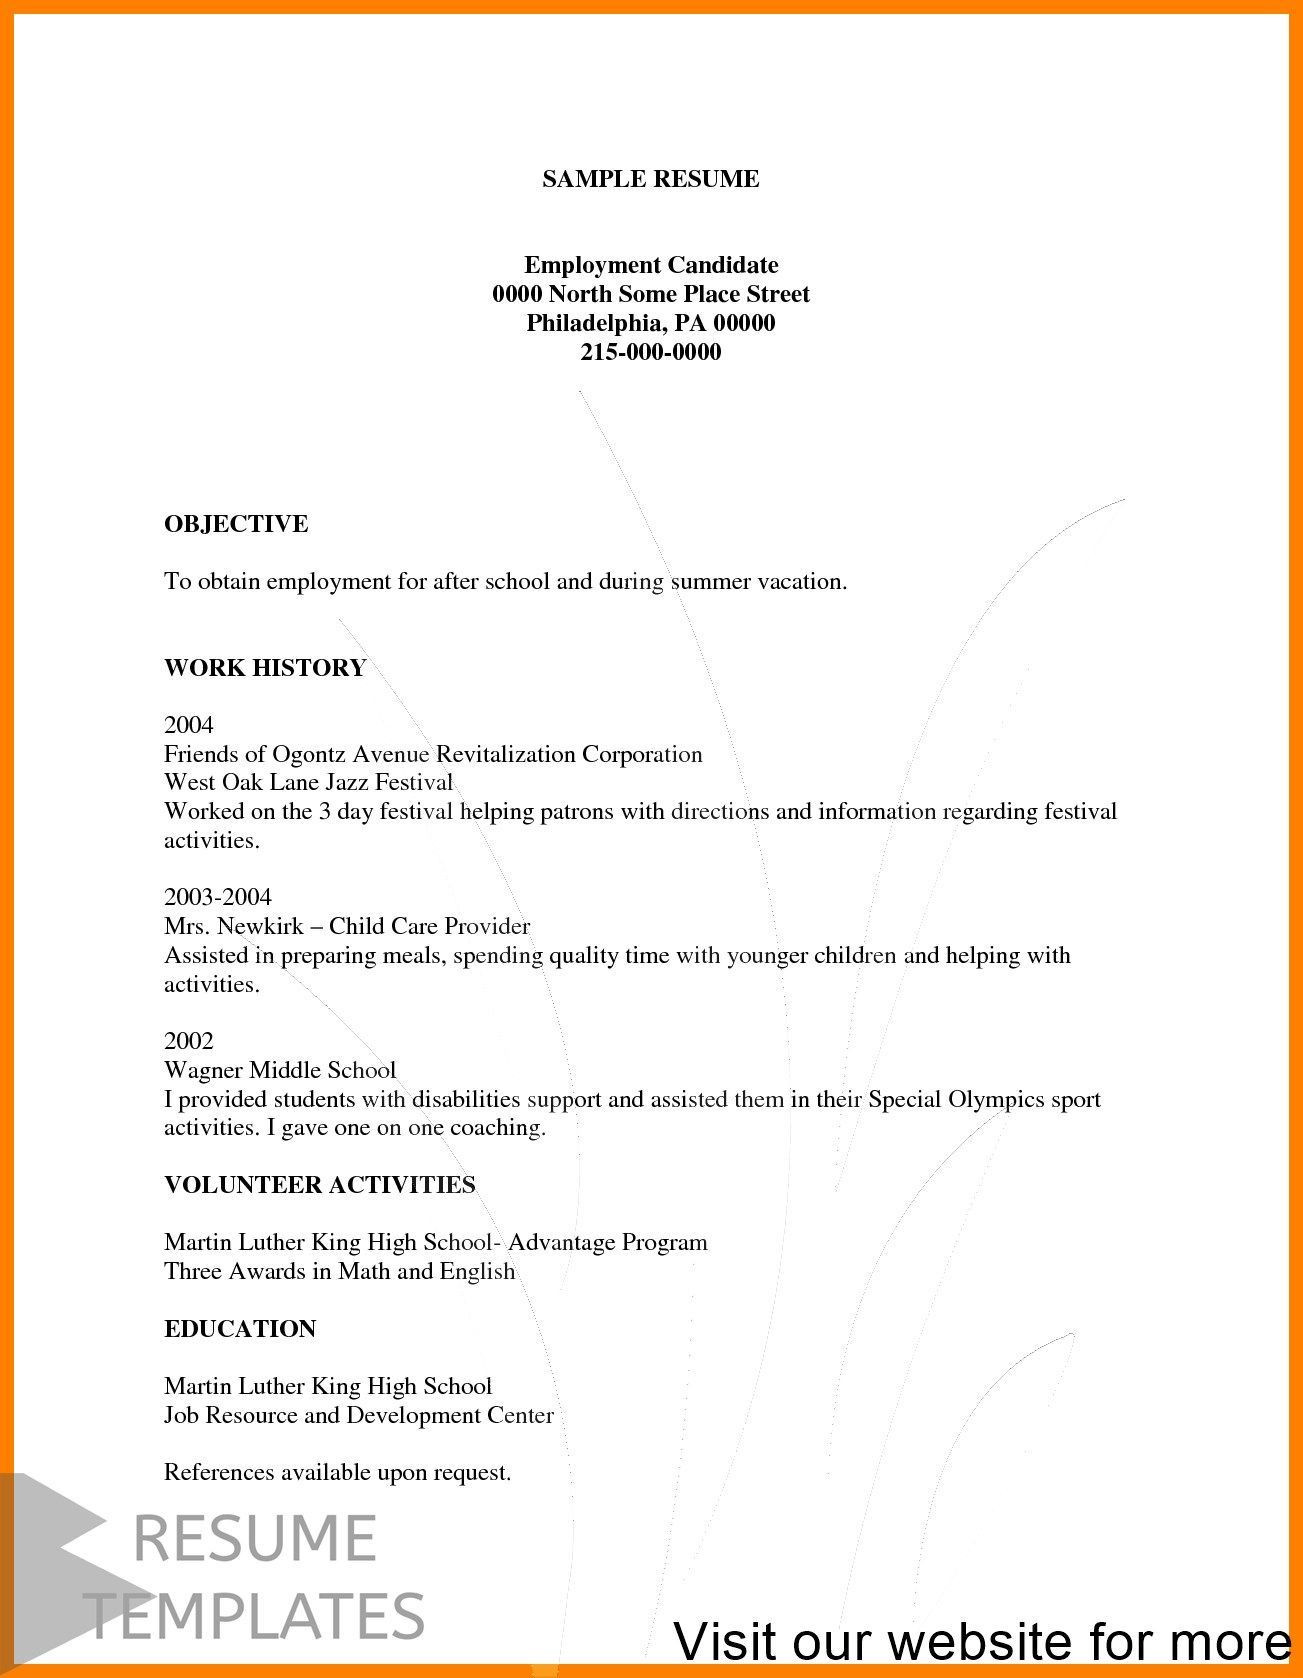 Resume Template for Students with Disabilities â­lancarrezekiq3 Teacher Professional Resume Sample Ideas Plantilla De …